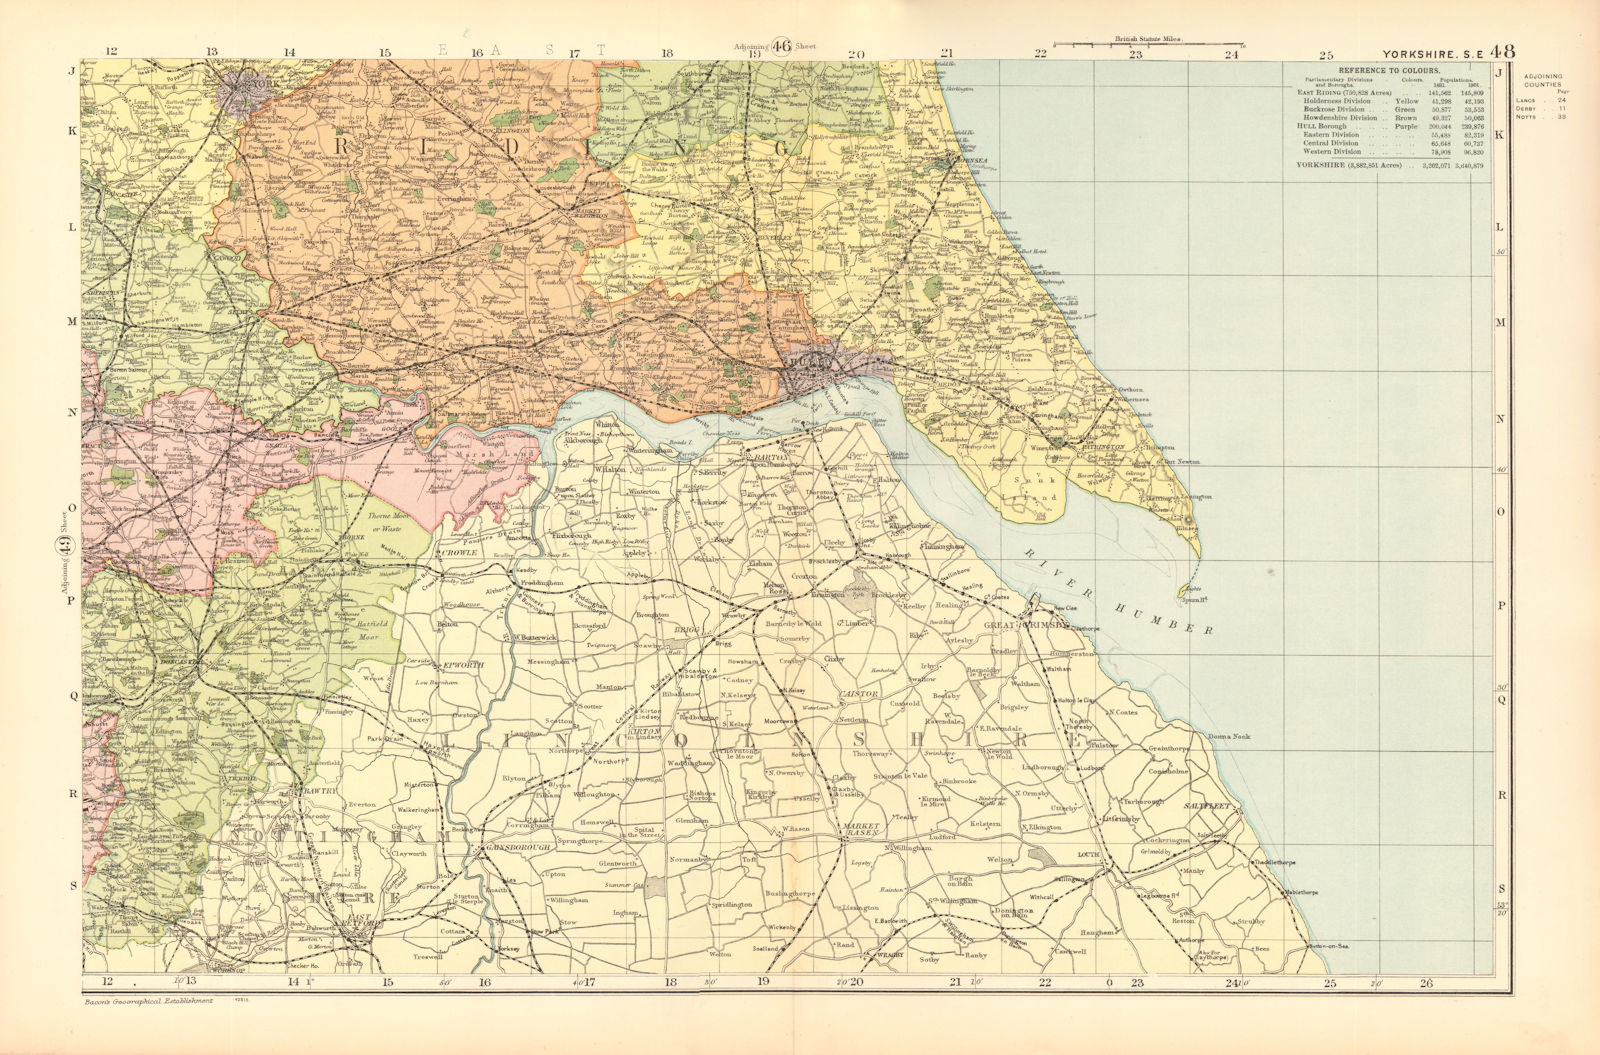 YORKSHIRE (SOUTH EAST). Showing Parliamentary divisions & parks. BACON 1904 map